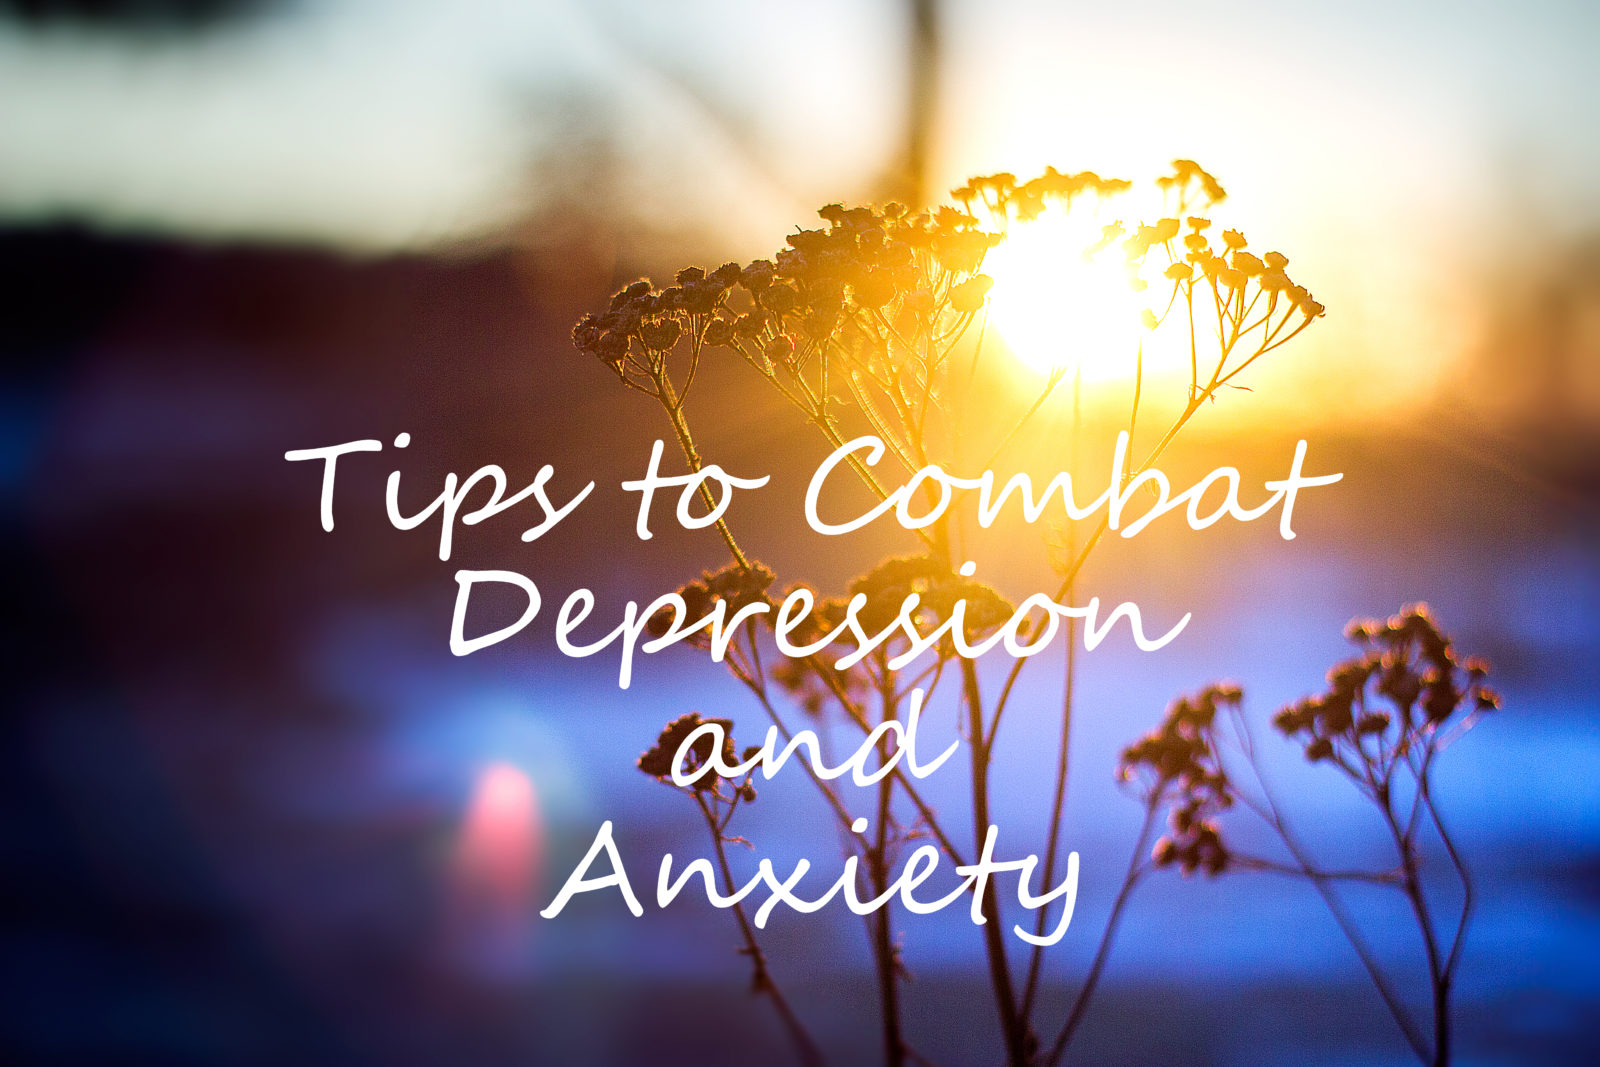 Tips to Combat Depression and Anxiety